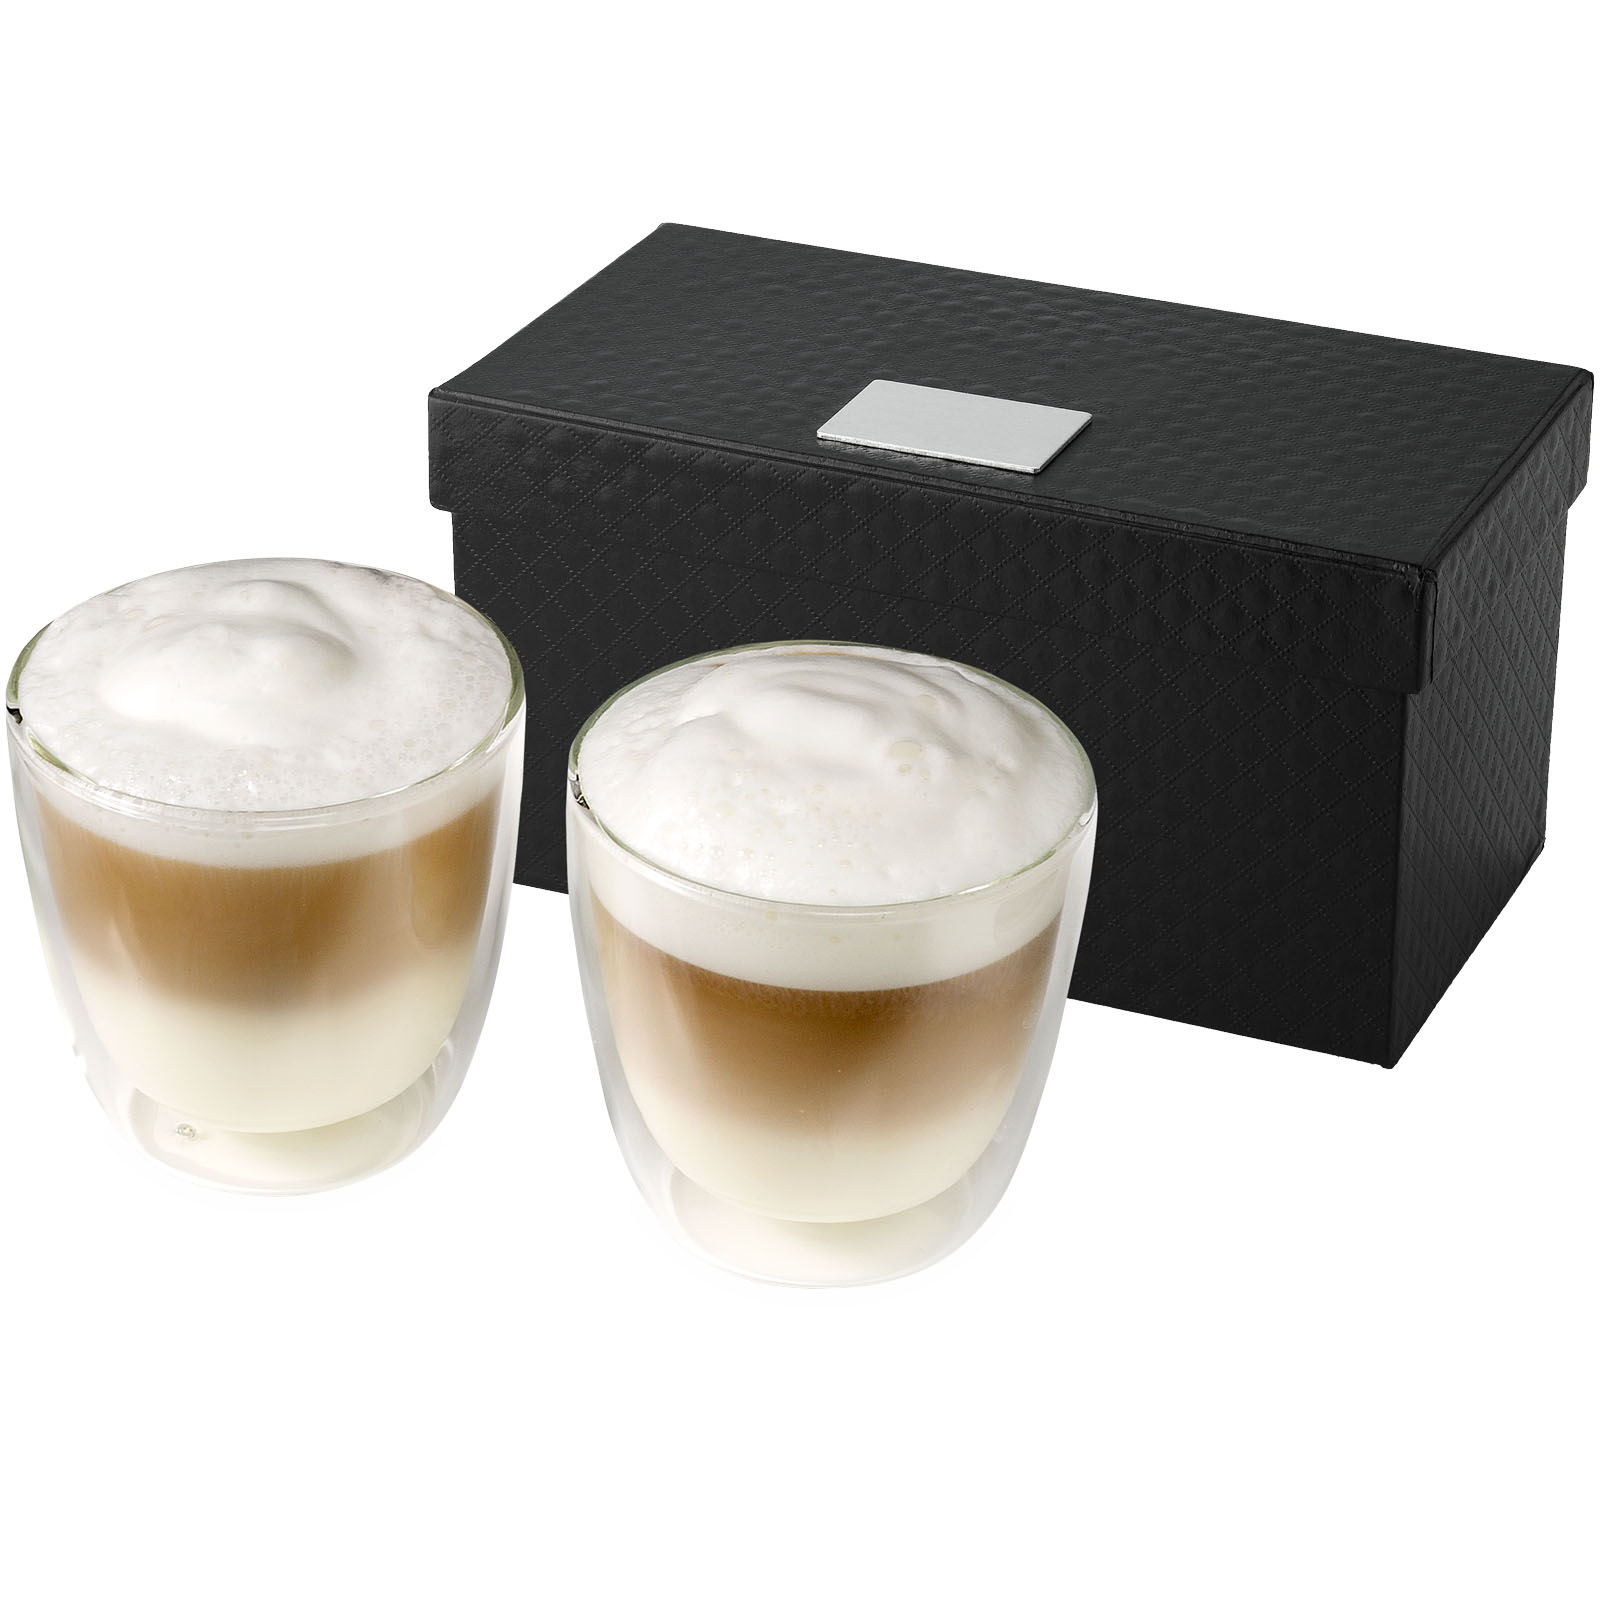 Advertising Glasses - Boda 2-piece glass coffee cup set - 0